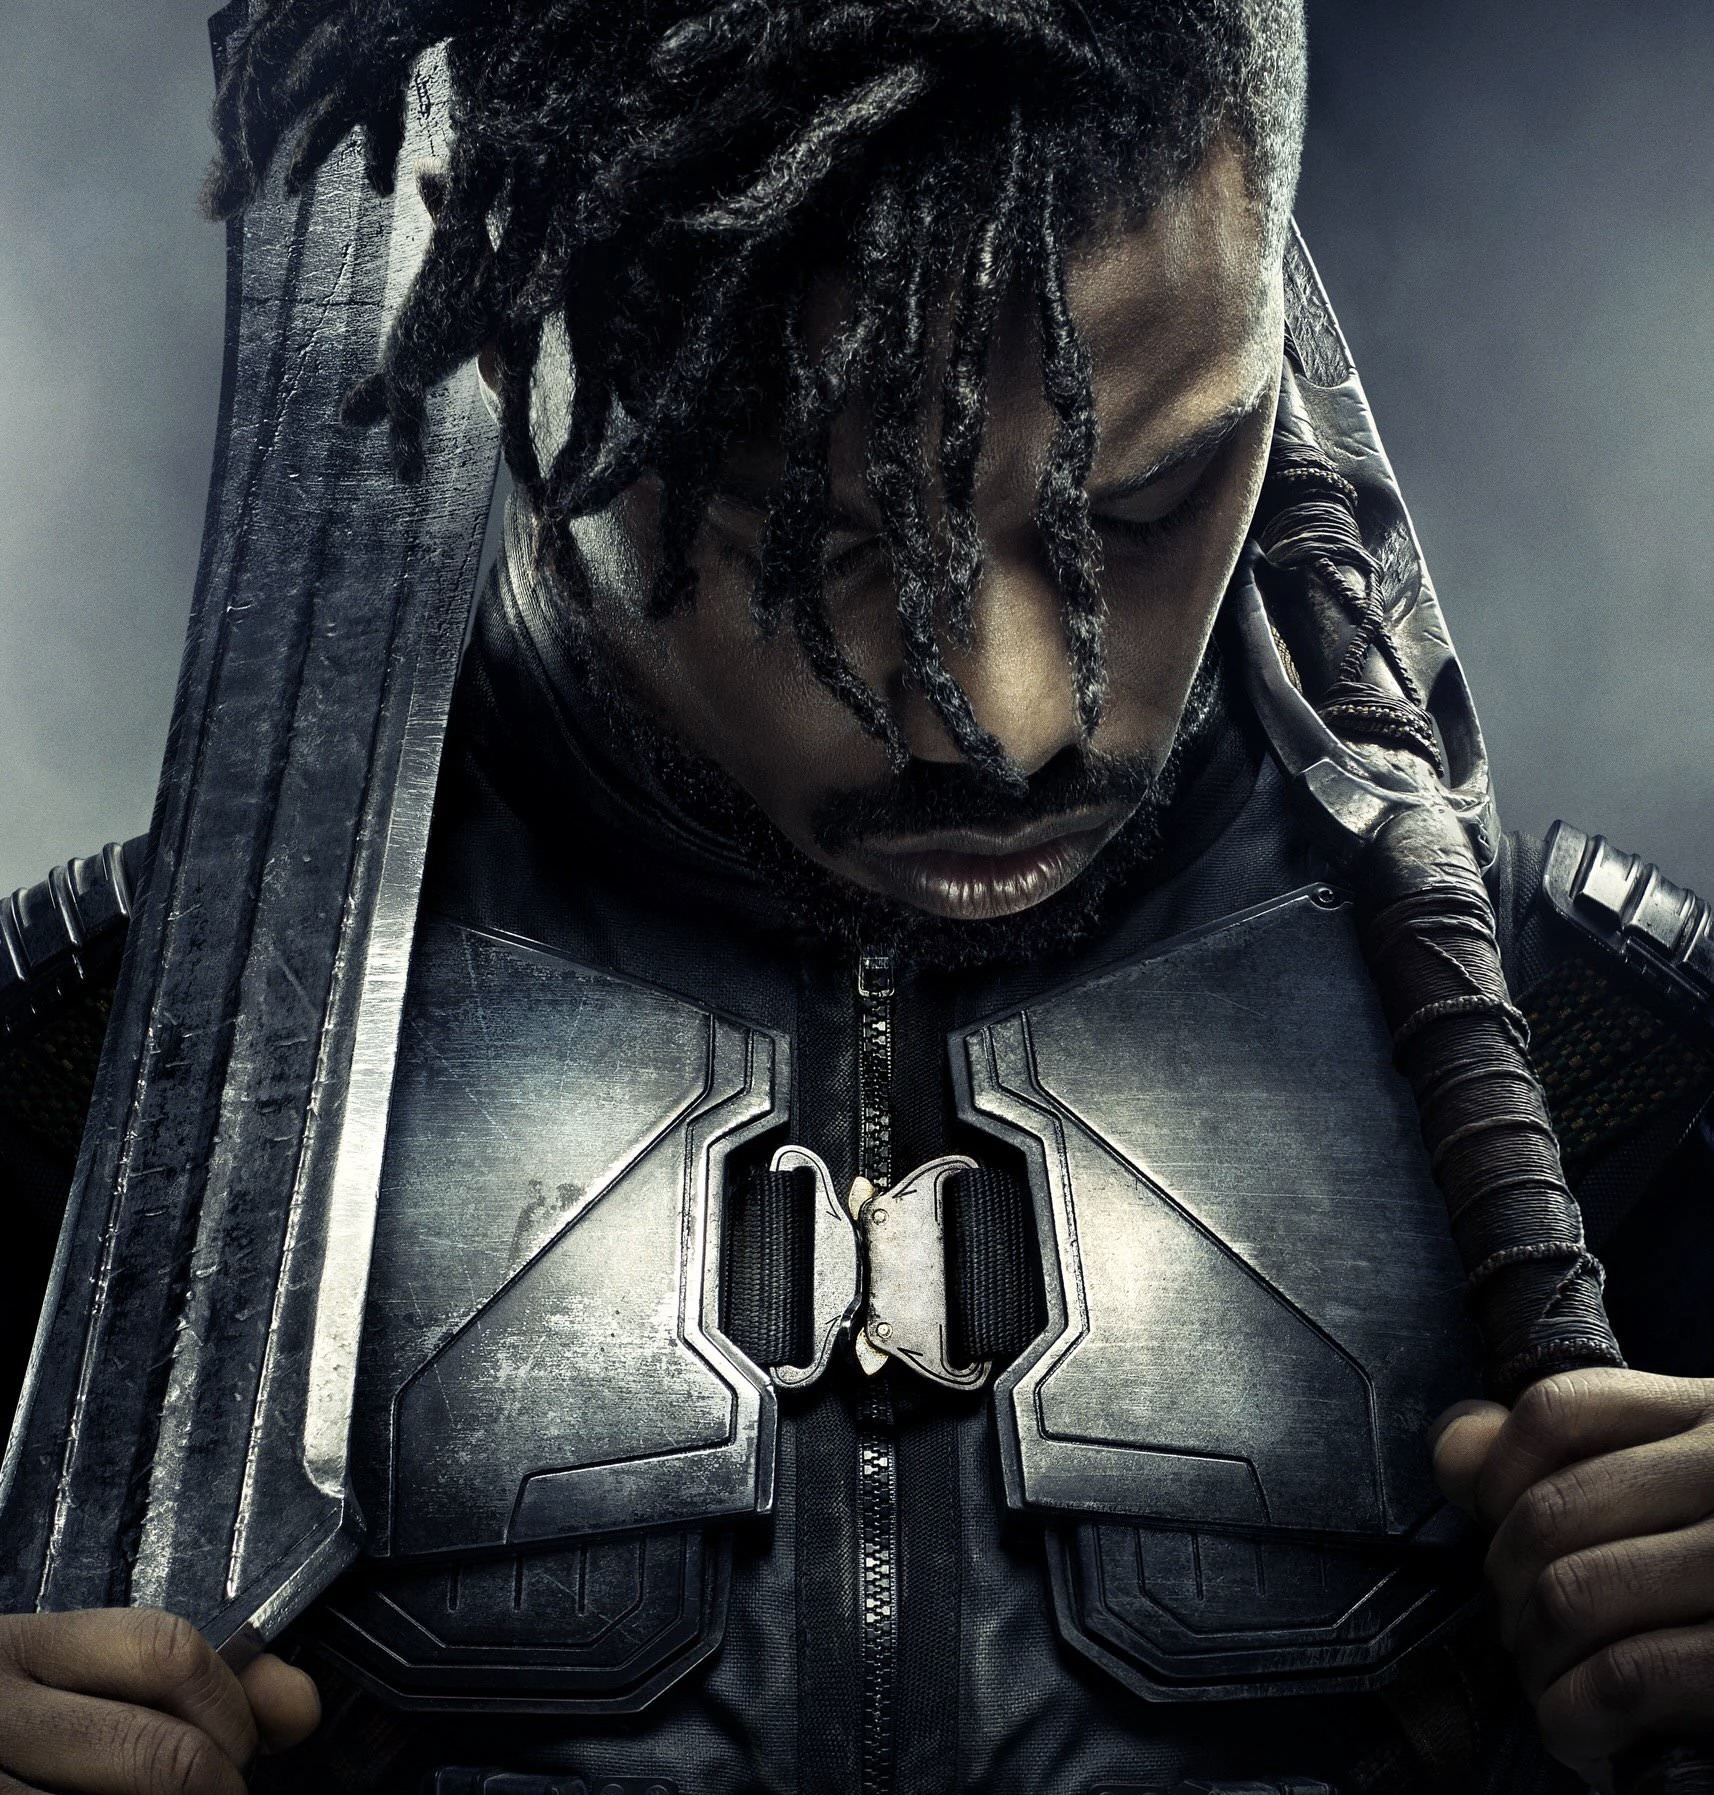 Black Panther: Michael B. Jordan on the movie and the mobile game